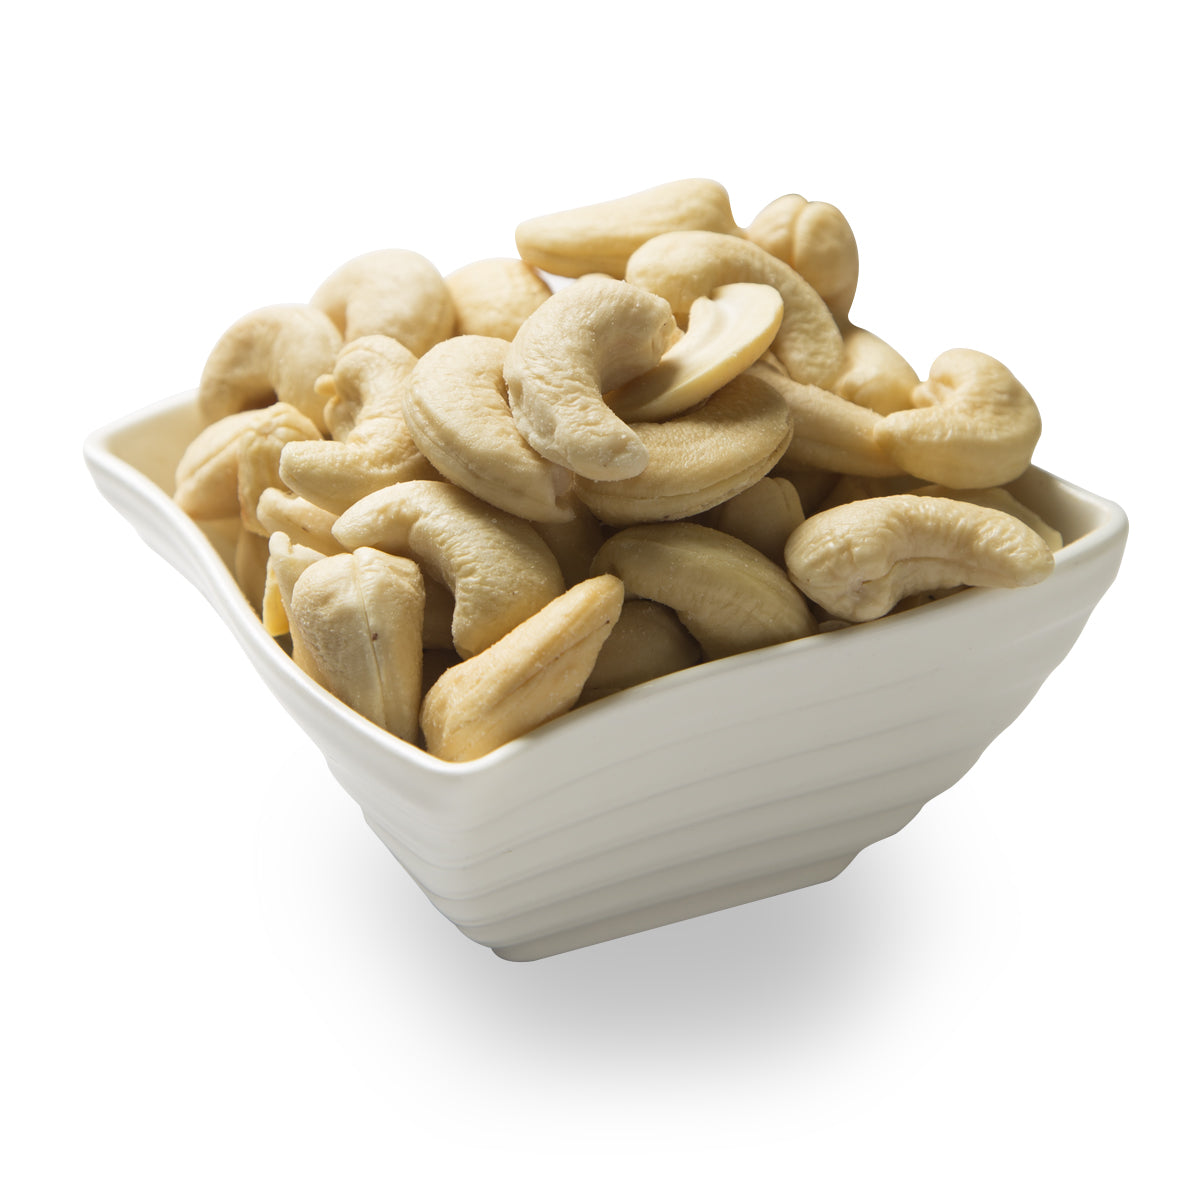 Delicious Crunchy Cashews from Heerson